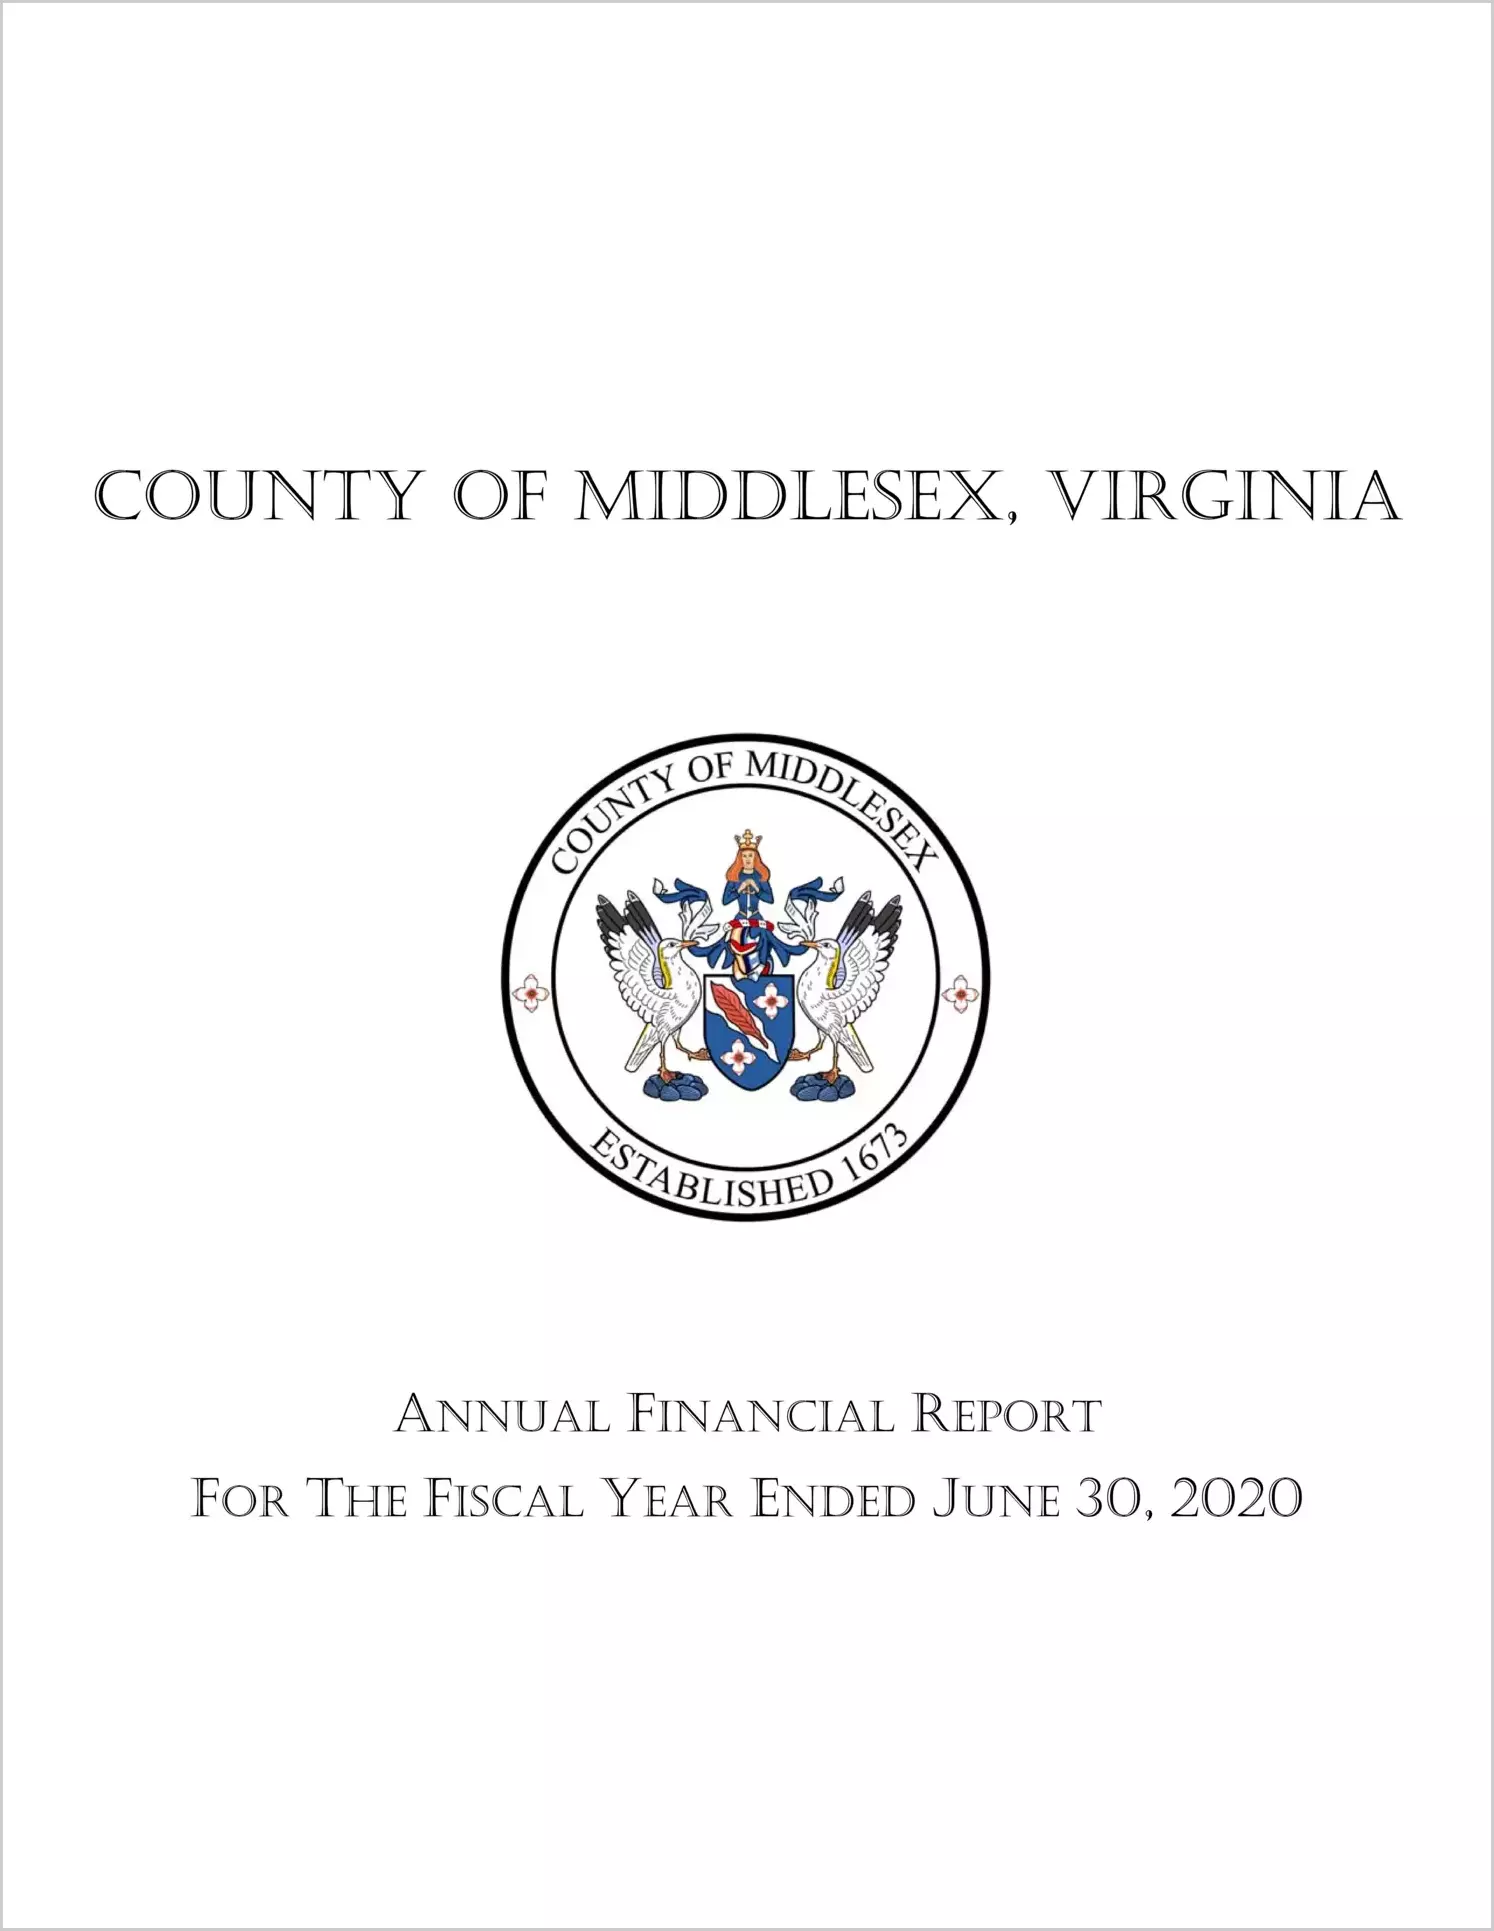 2020 Annual Financial Report for County of Middlesex